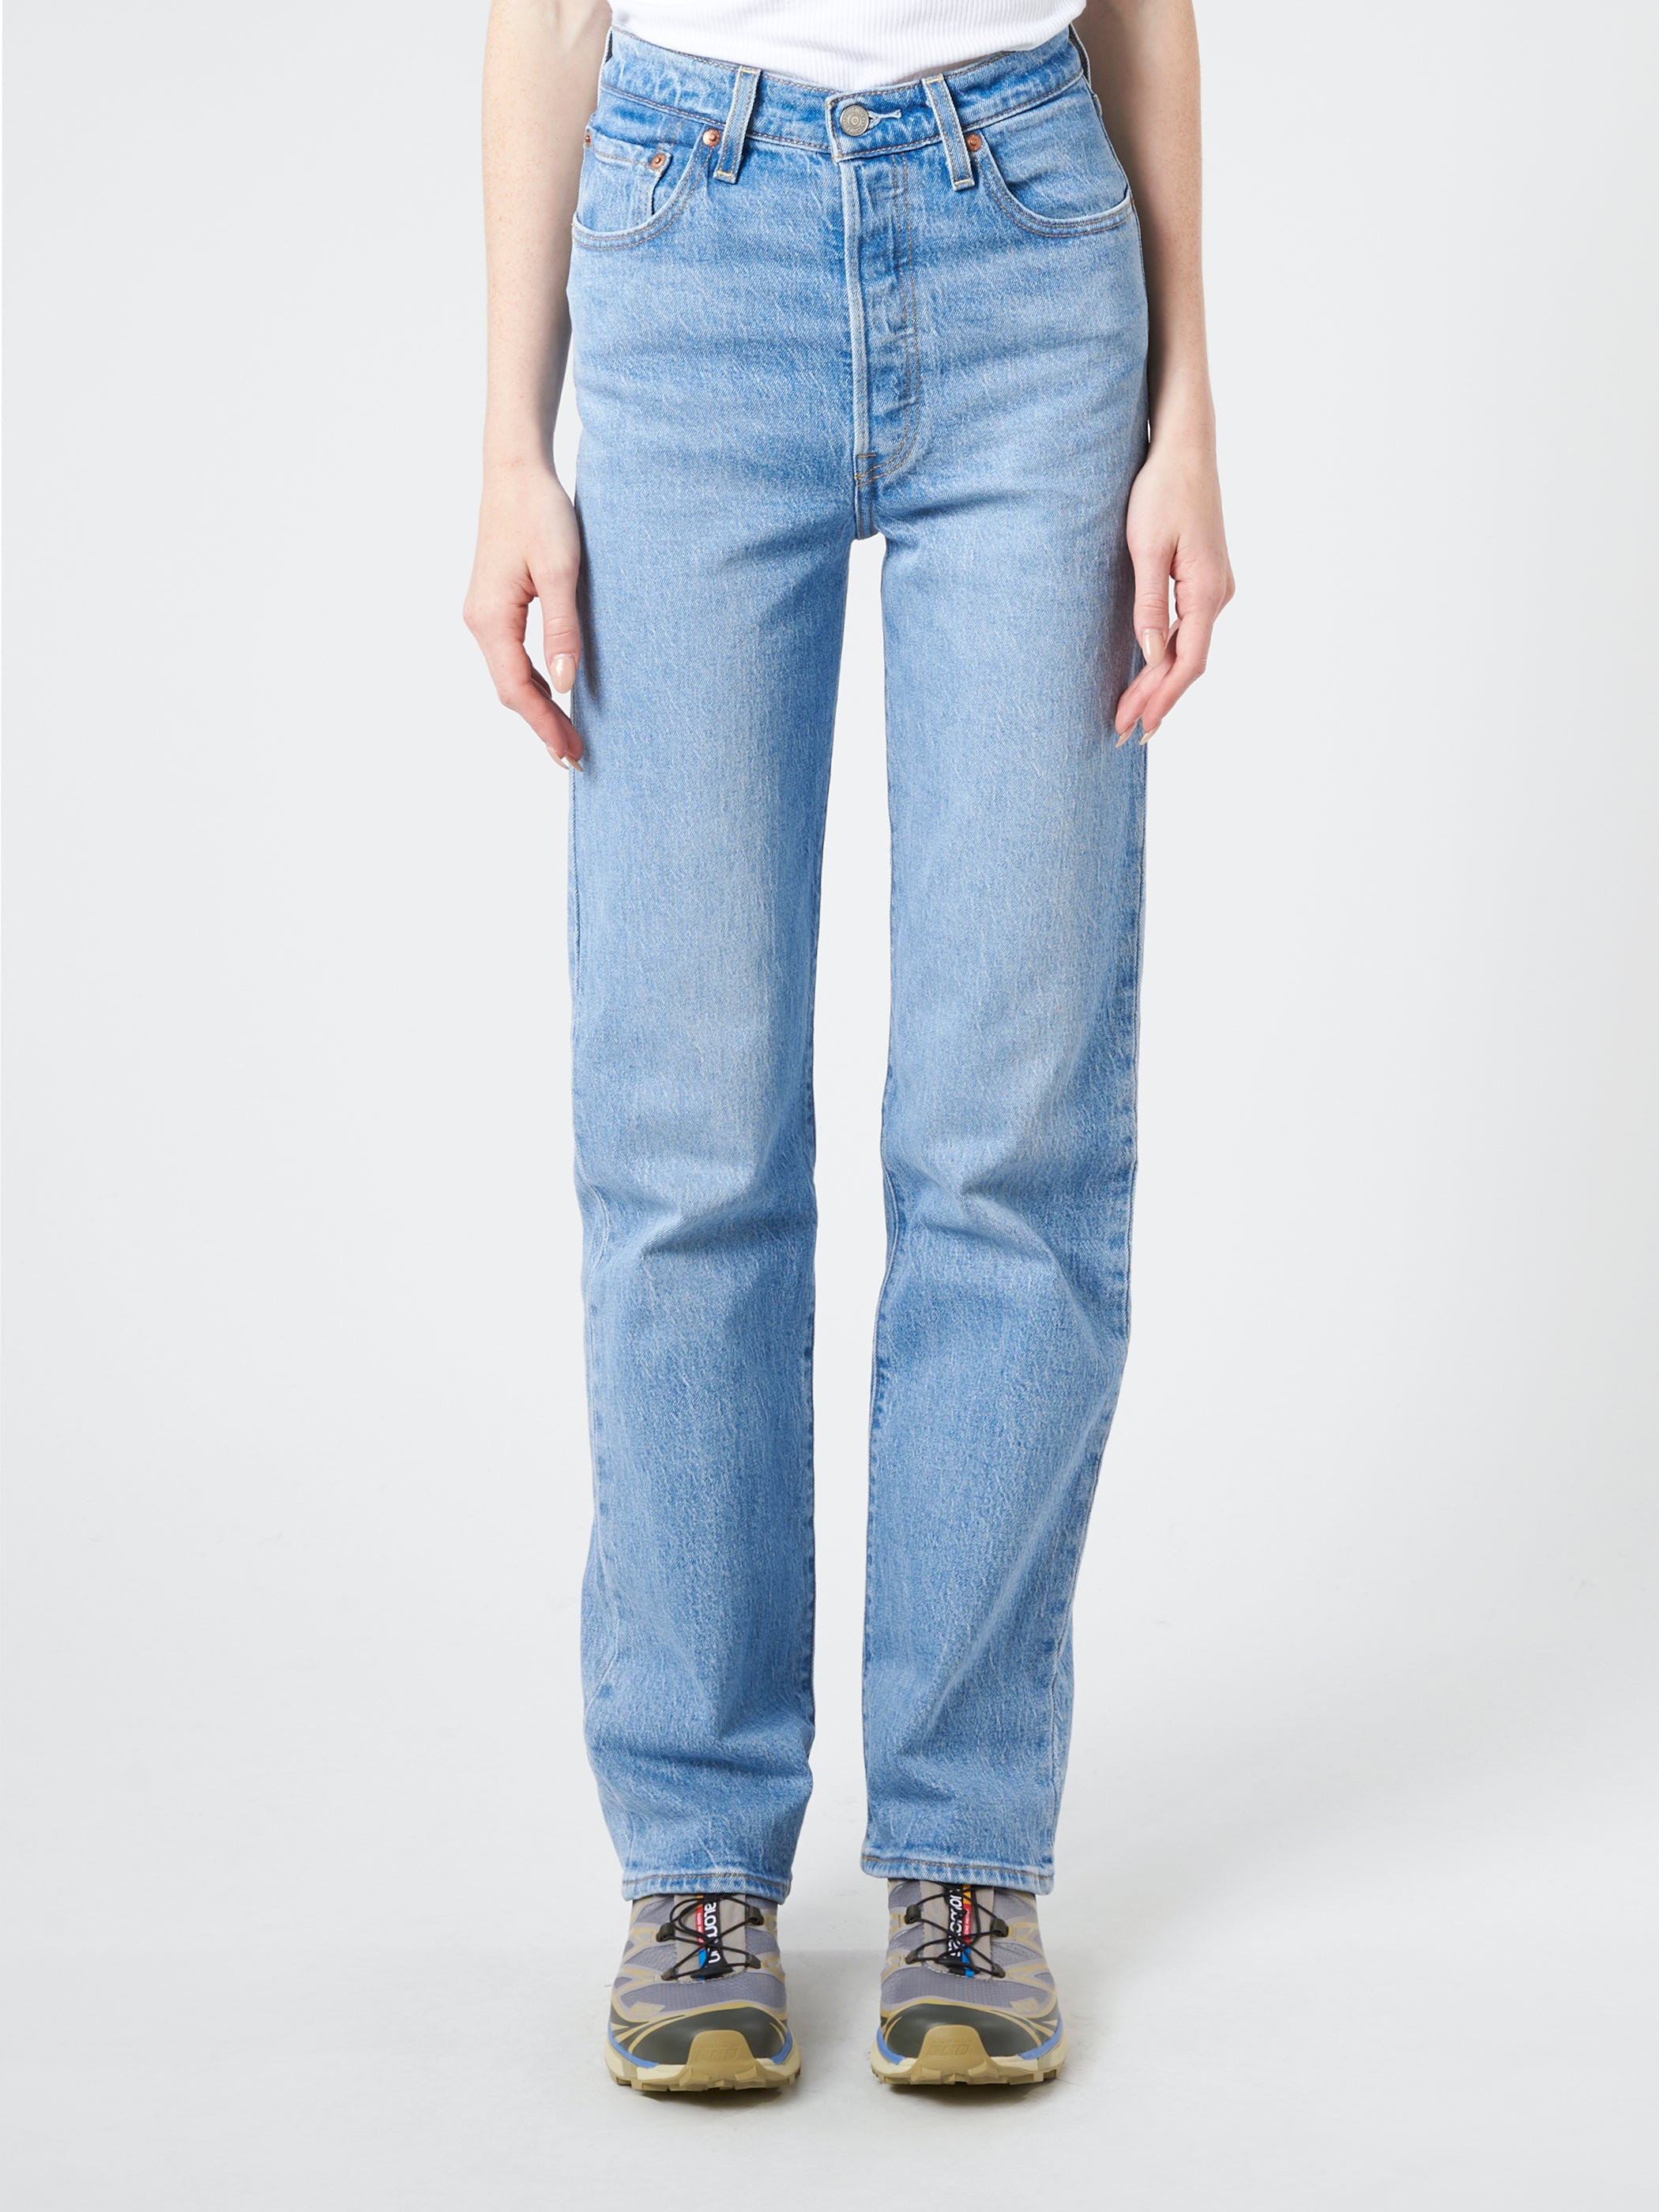 Levi's Ribcage Full Length Jeans - Valley View – Alice & Wonder